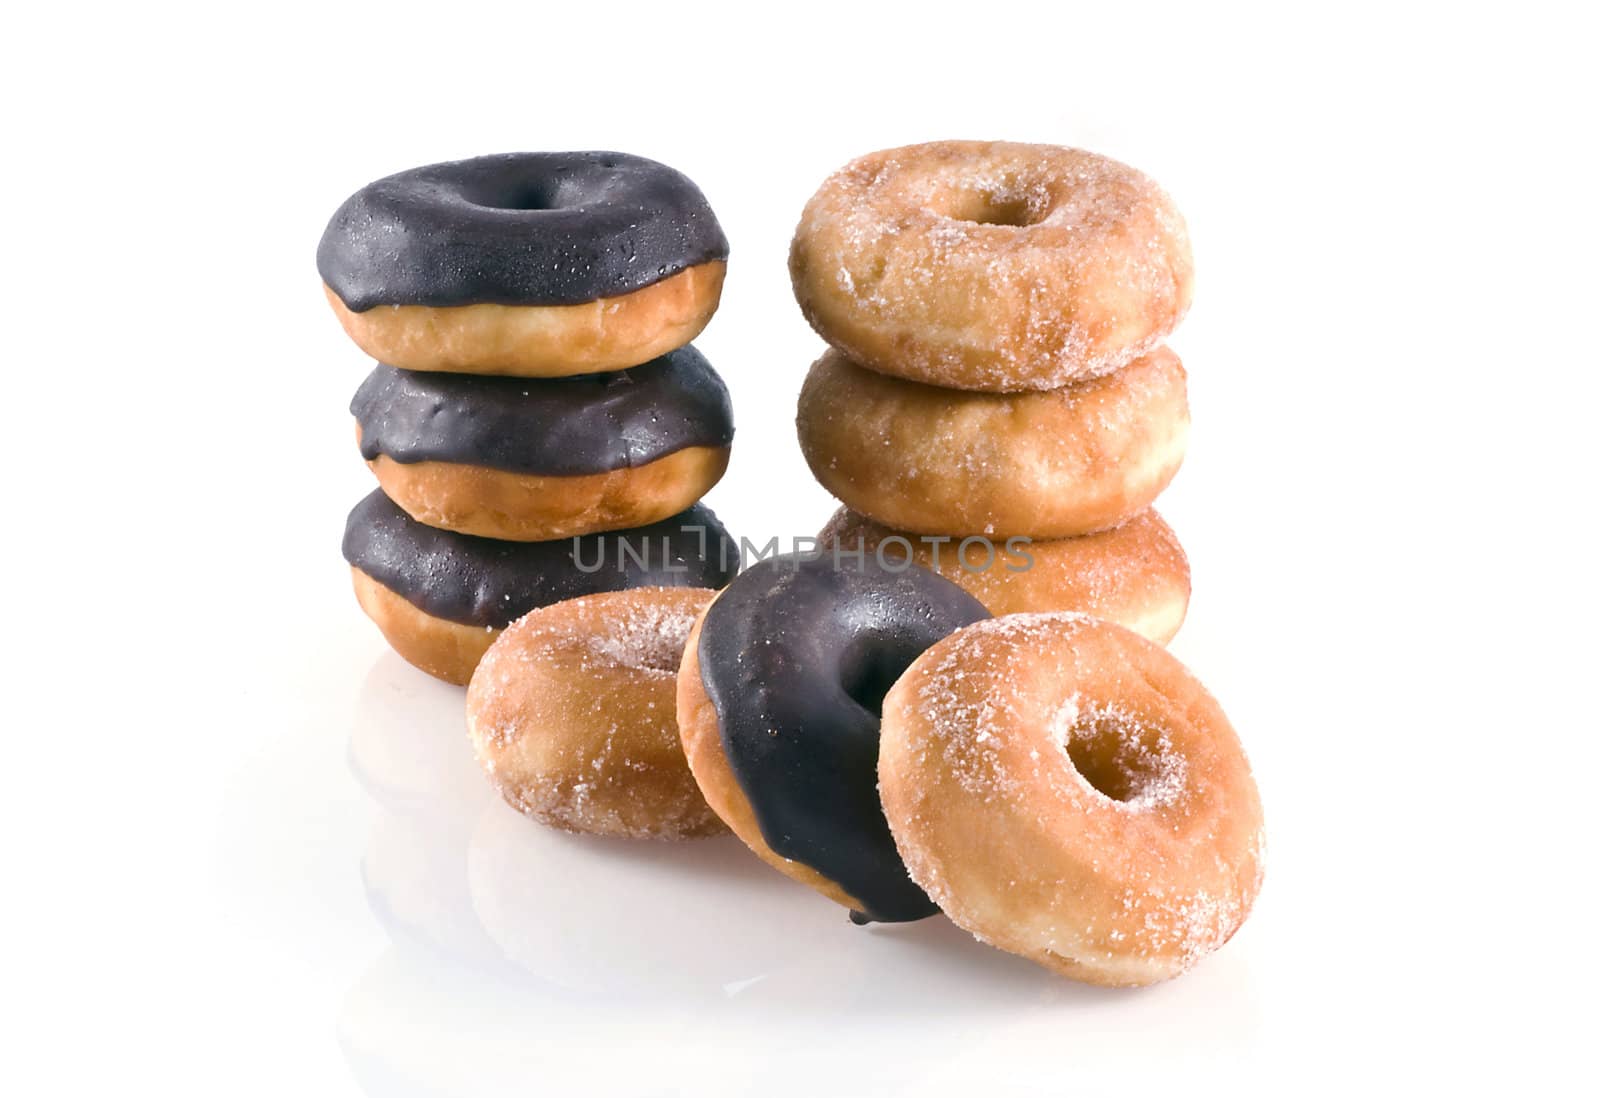 Chocolate donuts and donuts covered with sugar, isolated on white.